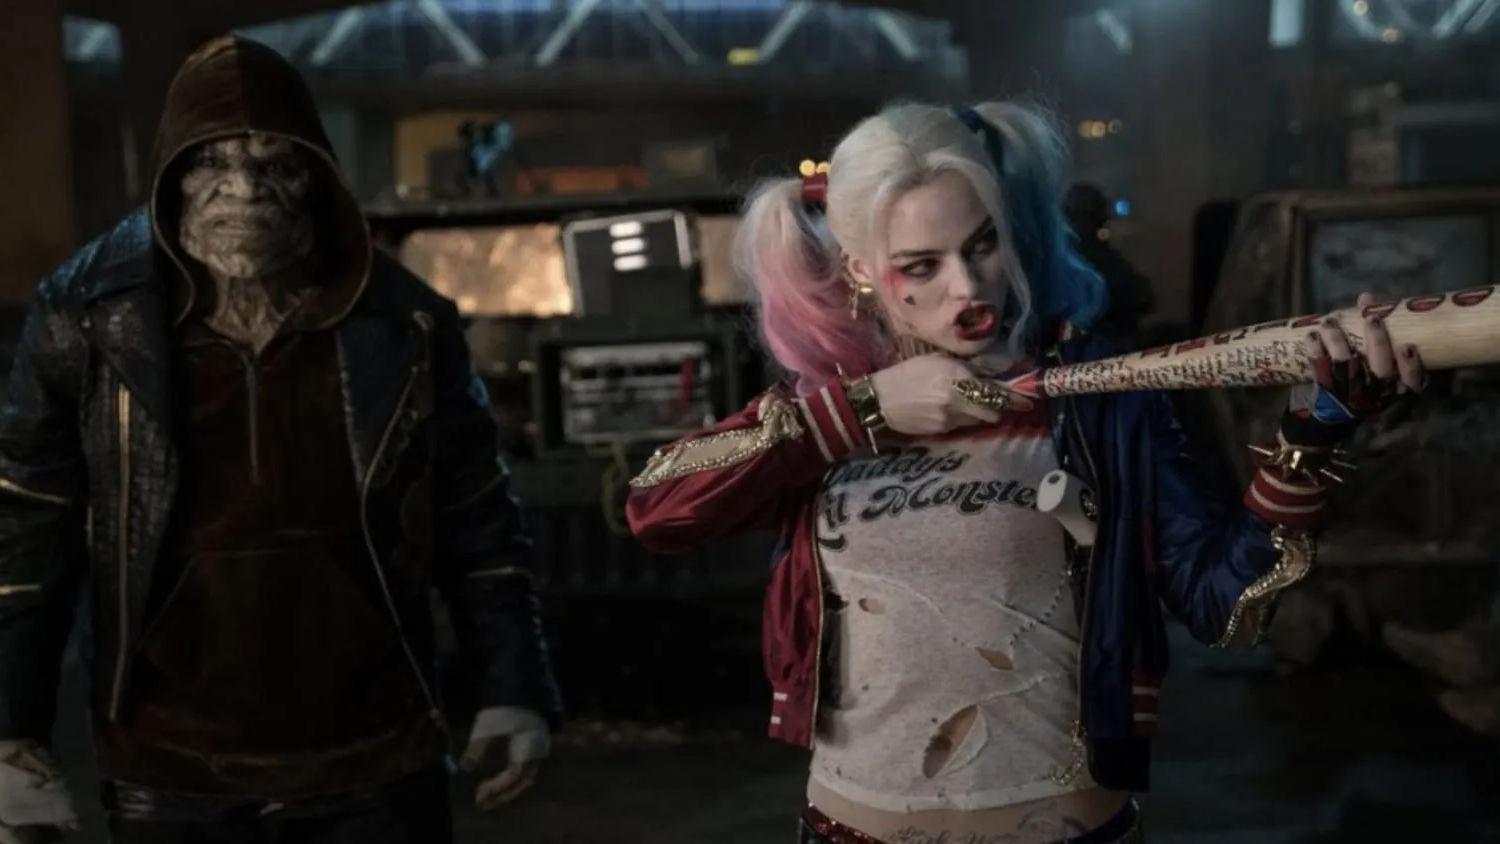 The Suicide Squad: James Gunn teases Harley Quinns death in new promo